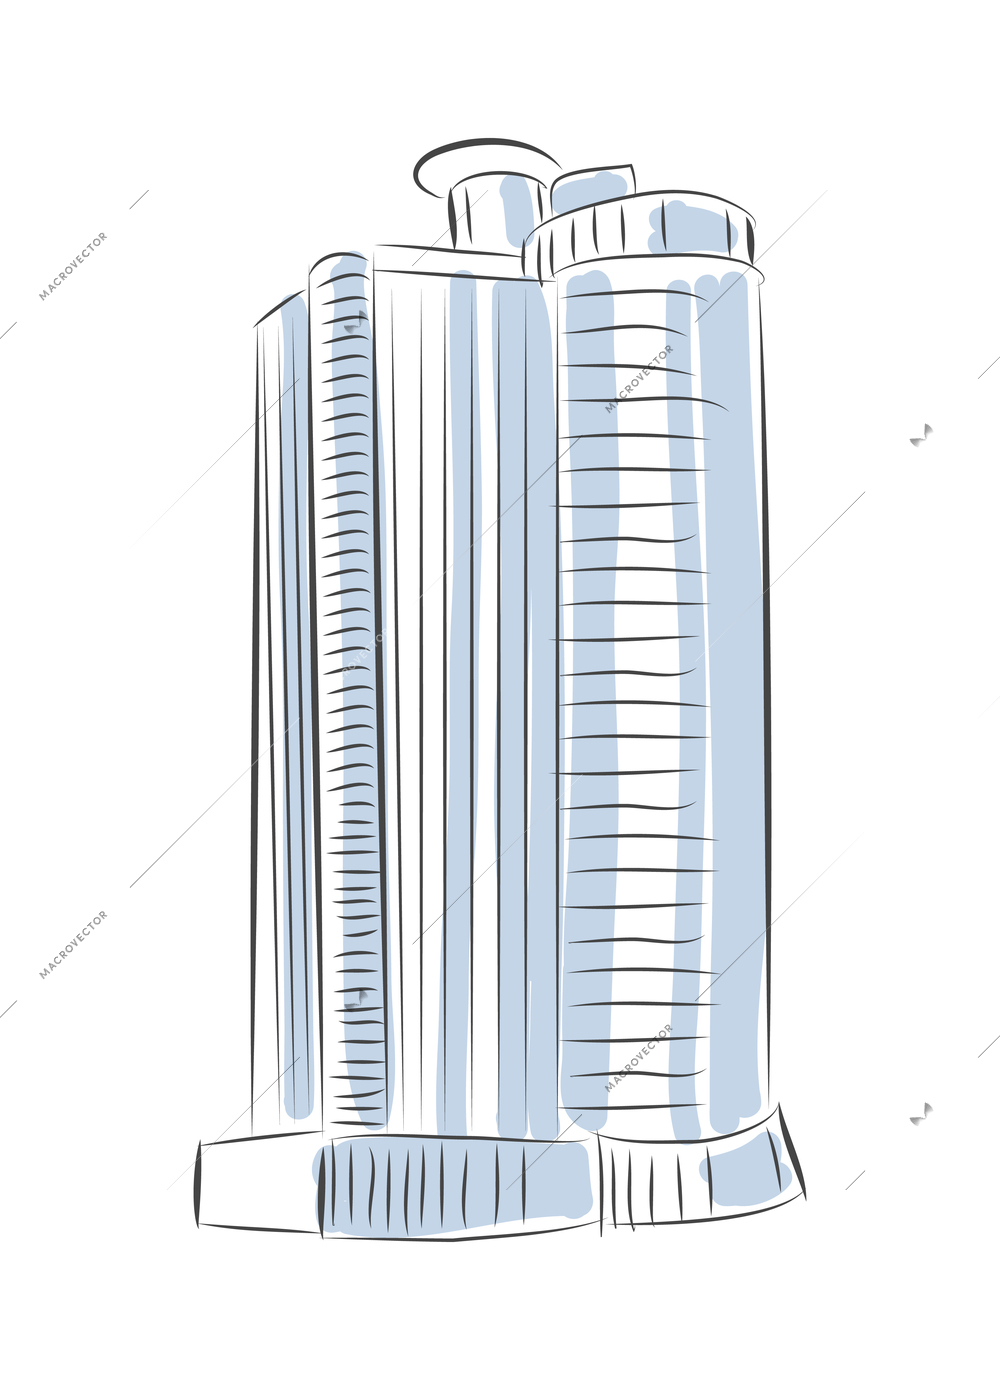 Sketch building composition with isolated image of drawn style tower skyscraper on blank background vector illustration